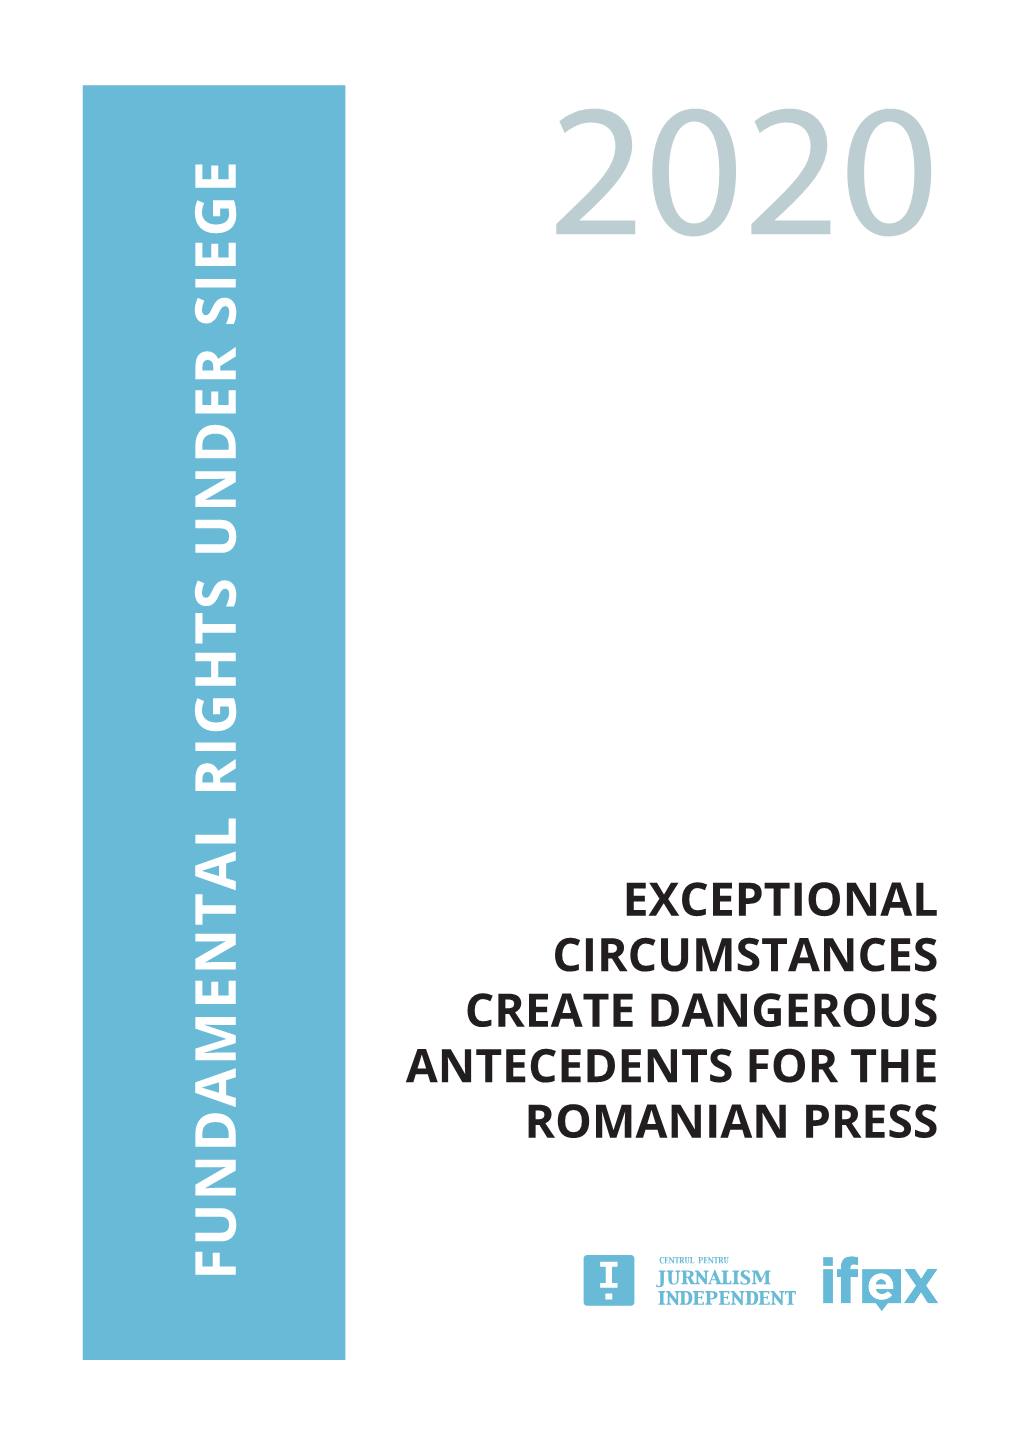 FUNDAMENTAL RIGHTS UNDER SIEGE © 2020 the Center for Independent Journalism Fundamental Rights Under Siege, 2020